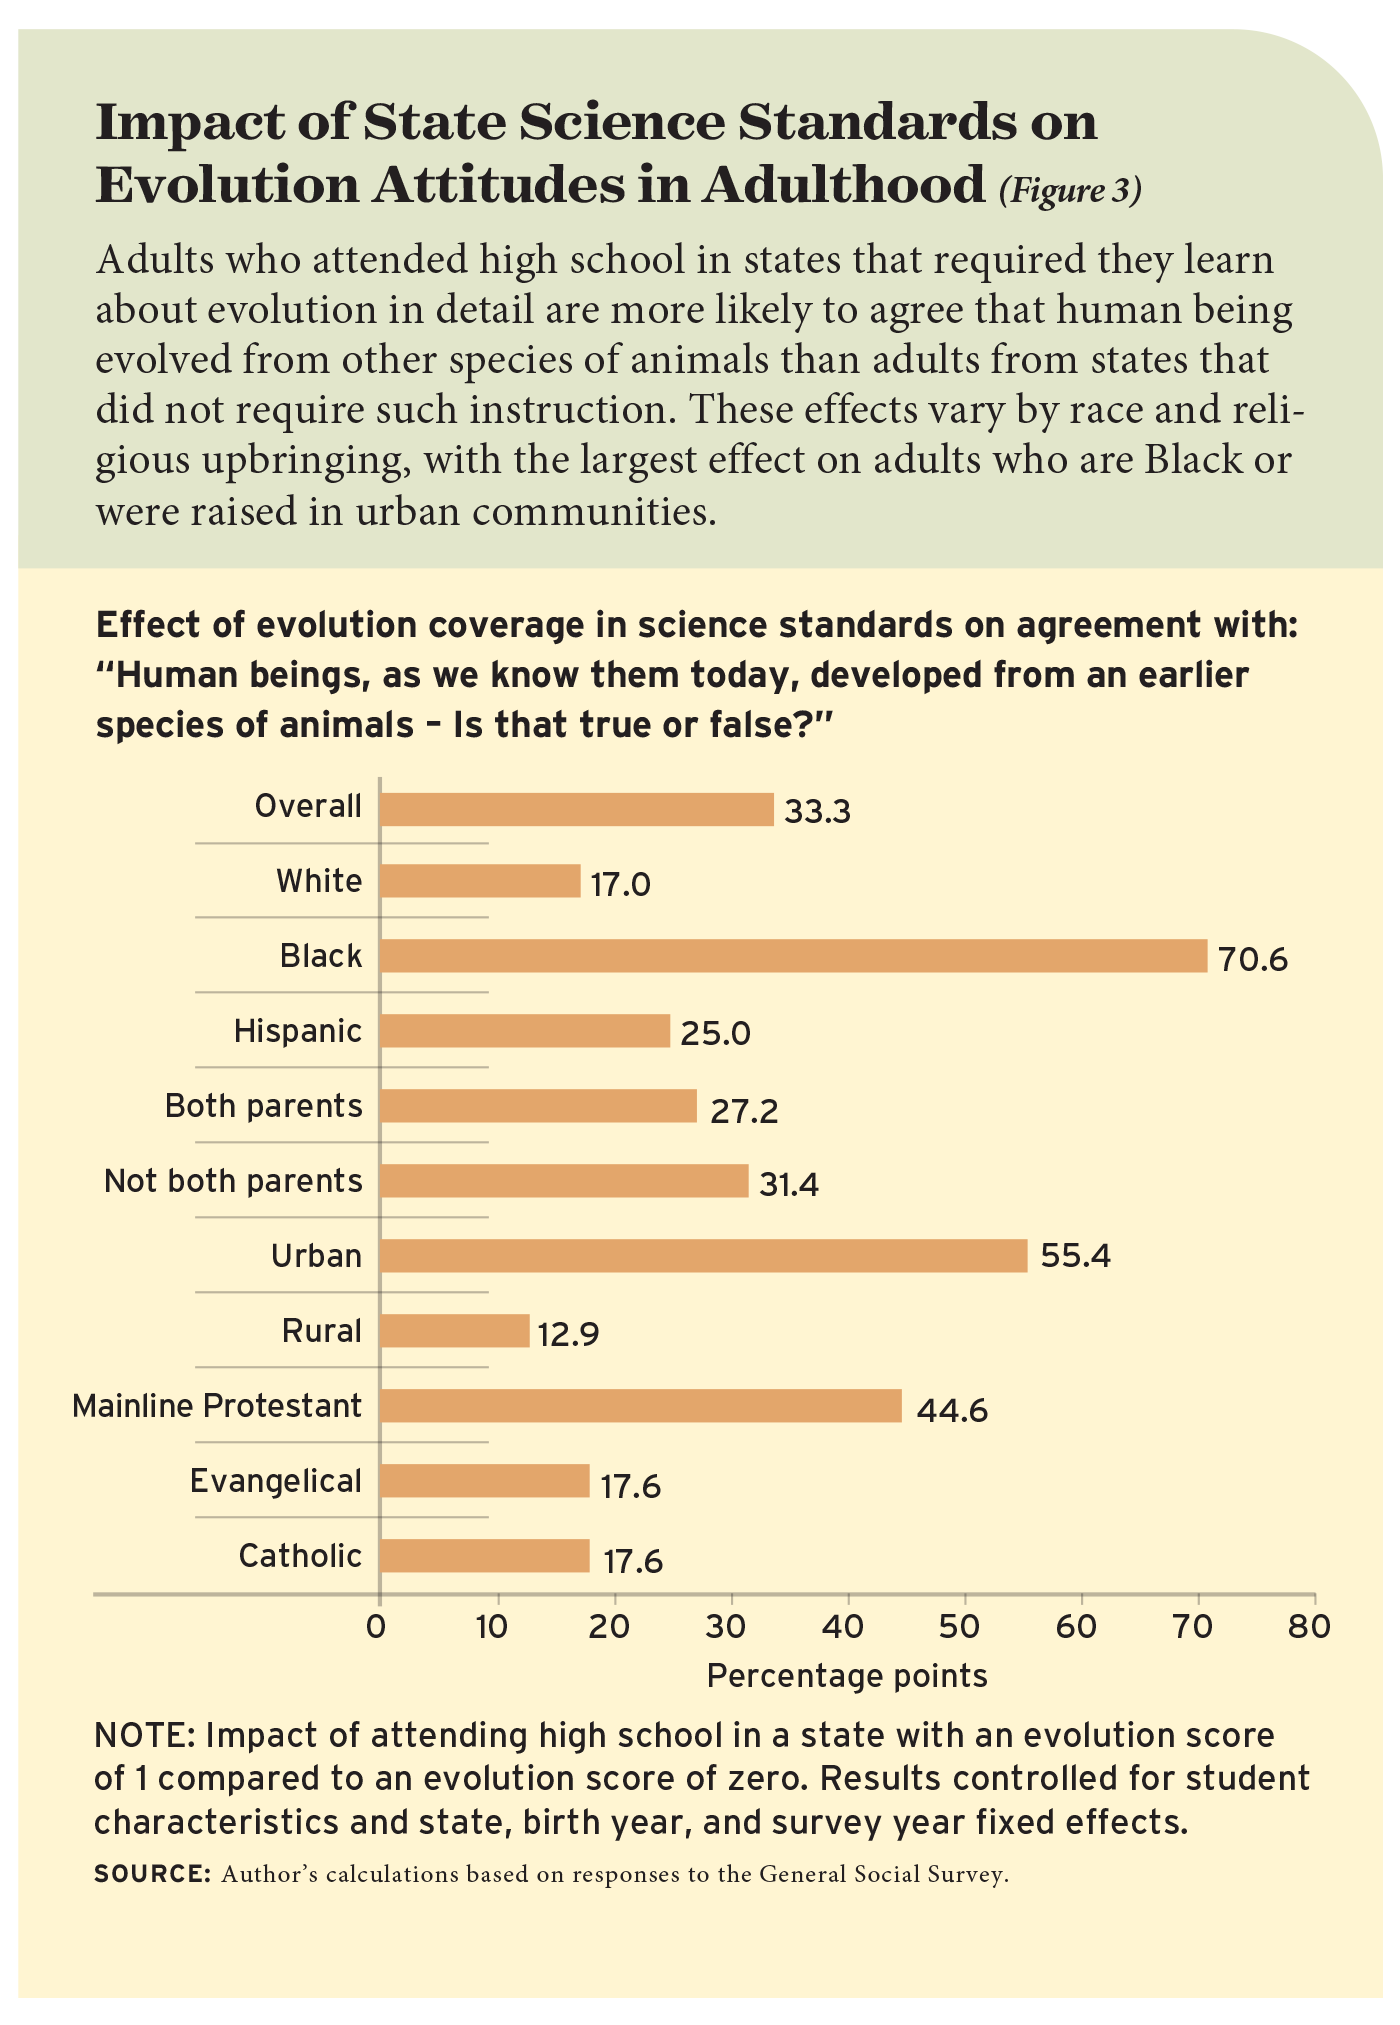 Impact of State Science Standards on Evolution Attitudes in Adulthood (Figure 3)